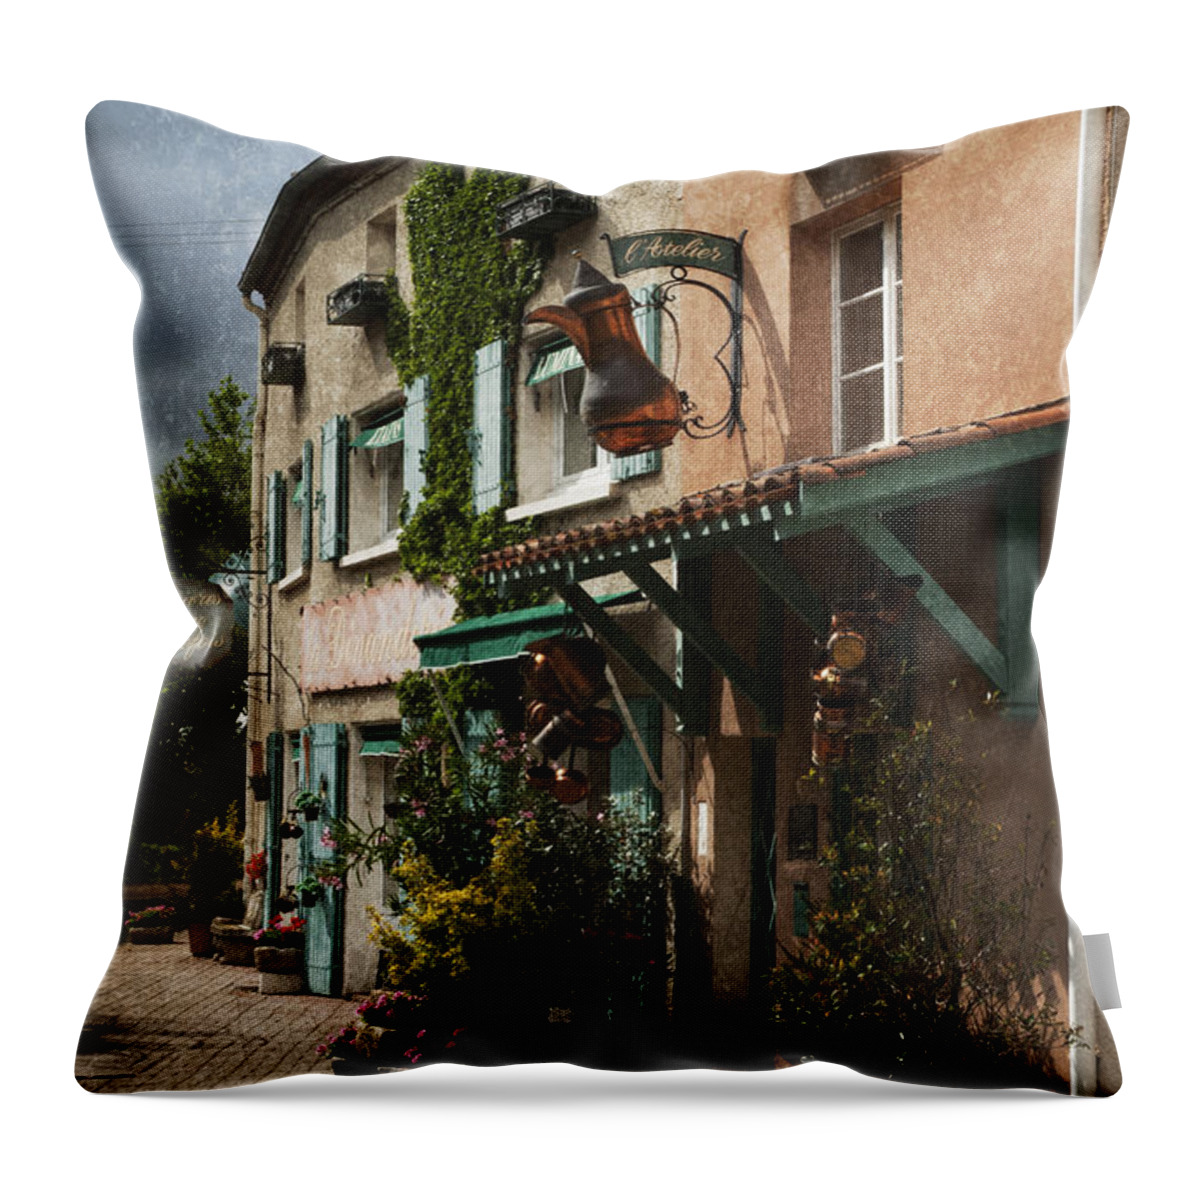 Copper Throw Pillow featuring the photograph Copper Sales Store Durfort France by Greg Kluempers